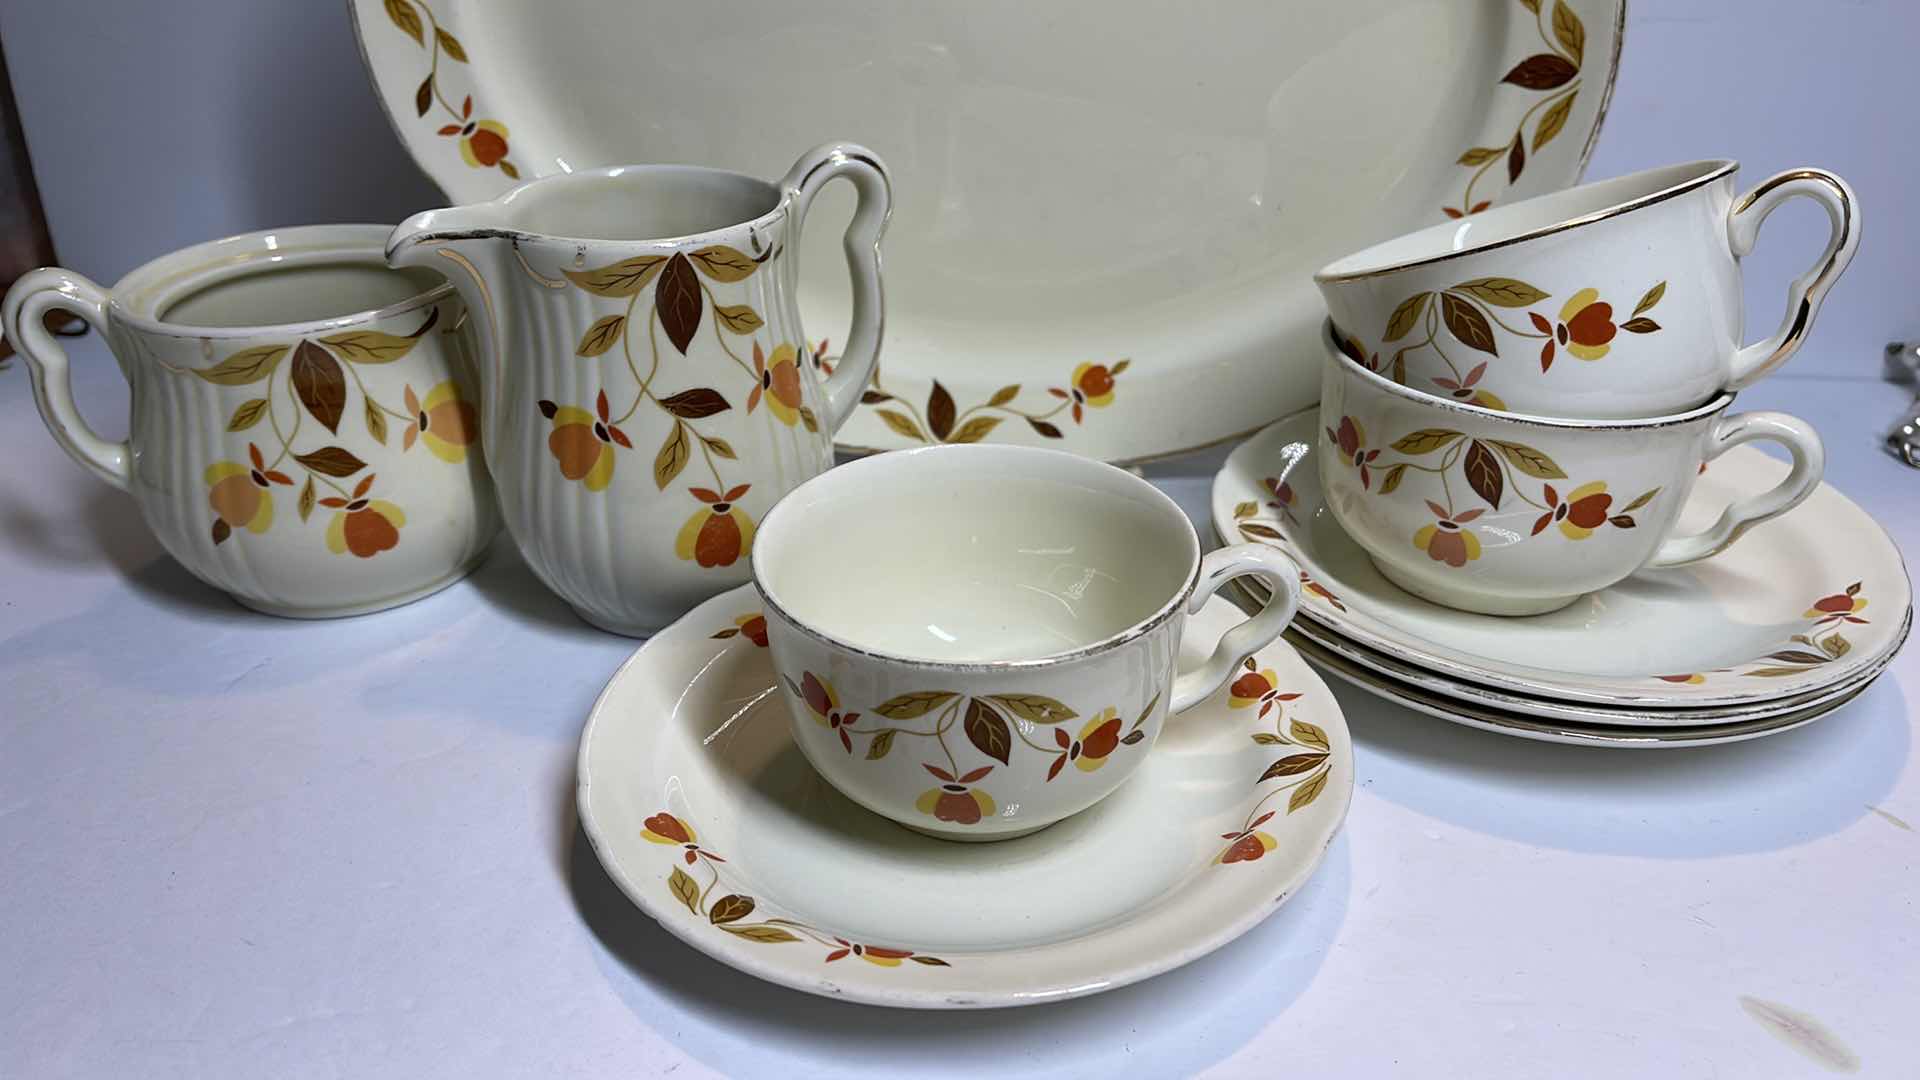 Photo 2 of SUPERIOR HALL QUALITY AUTUMN LEAF PATTERN -1 SERVING TRAY - 3 TEA CUPS - 4 SAUCERS -